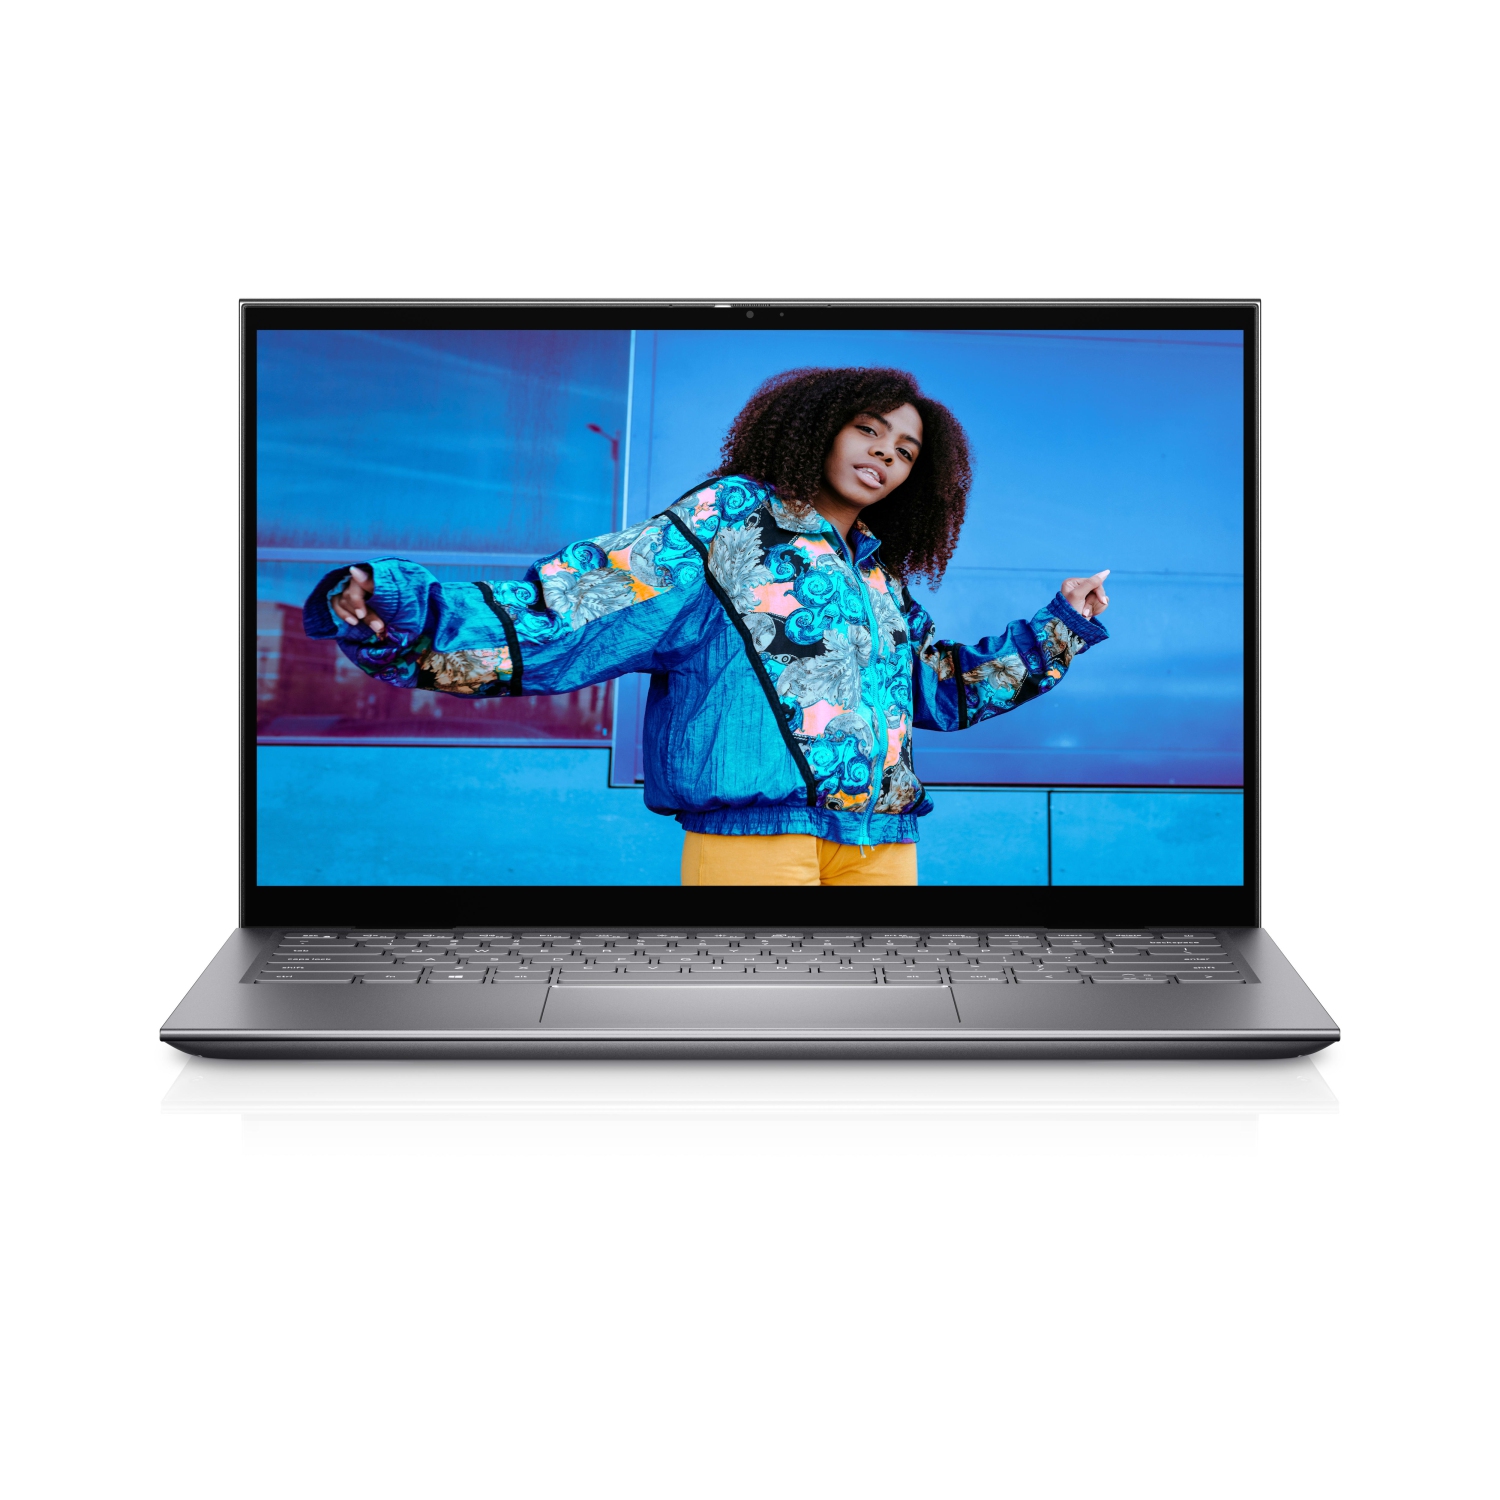 Refurbished (Excellent) – Dell Inspiron 5410 2-in-1 (2021) | 14" FHD Touch | Core i5 - 256GB SSD - 16GB RAM | 4 Cores @ 4.2 GHz - 11th Gen CPU